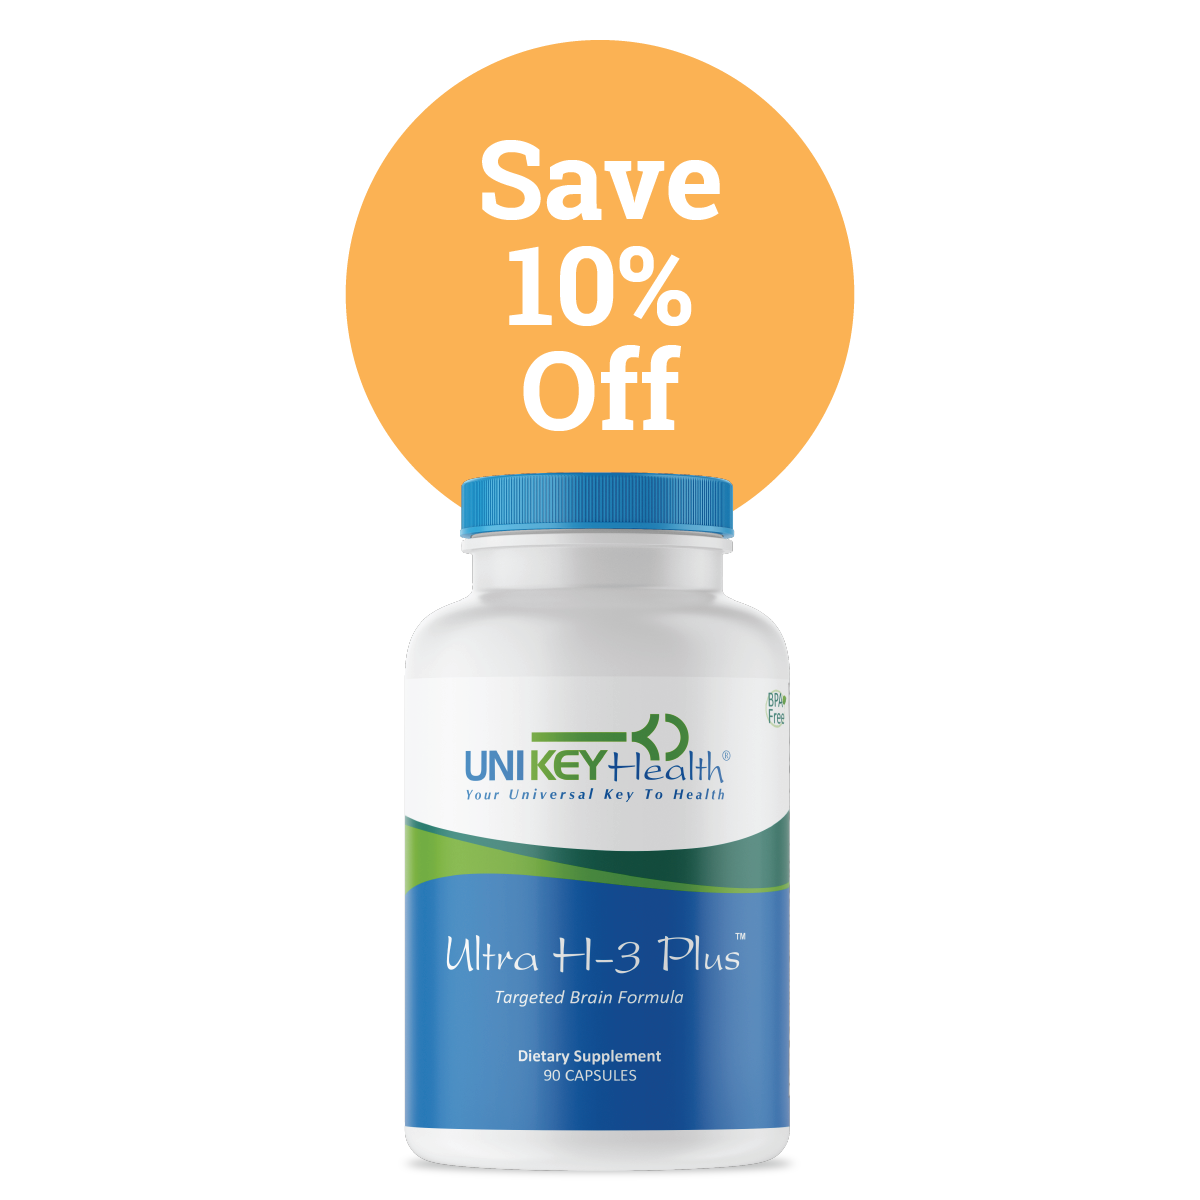 Save 10% on Ultra H-3 Plus